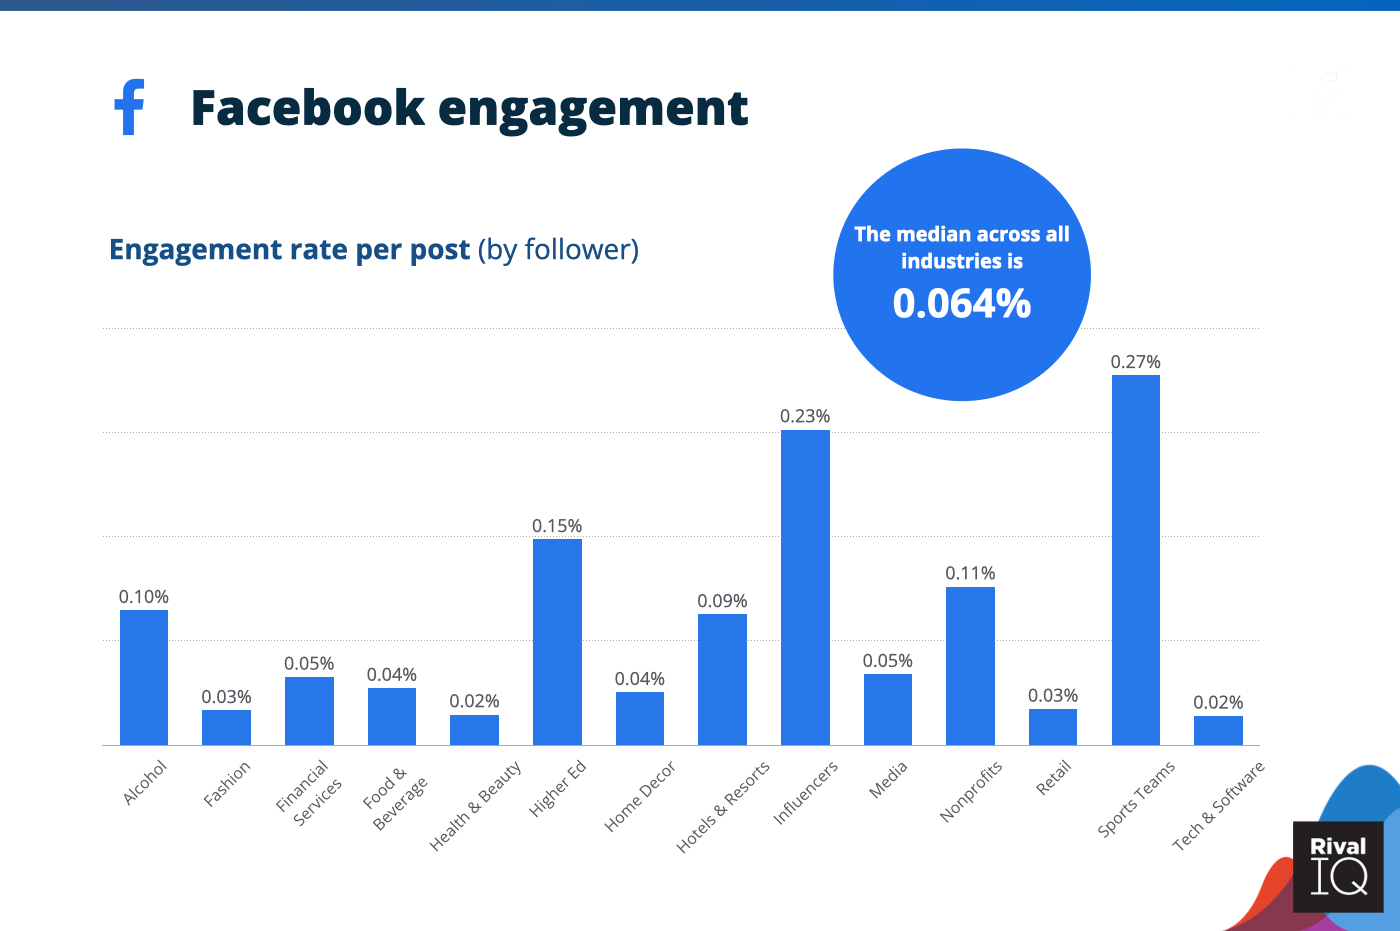 chart showing average engagement rates on Facebook for different industries